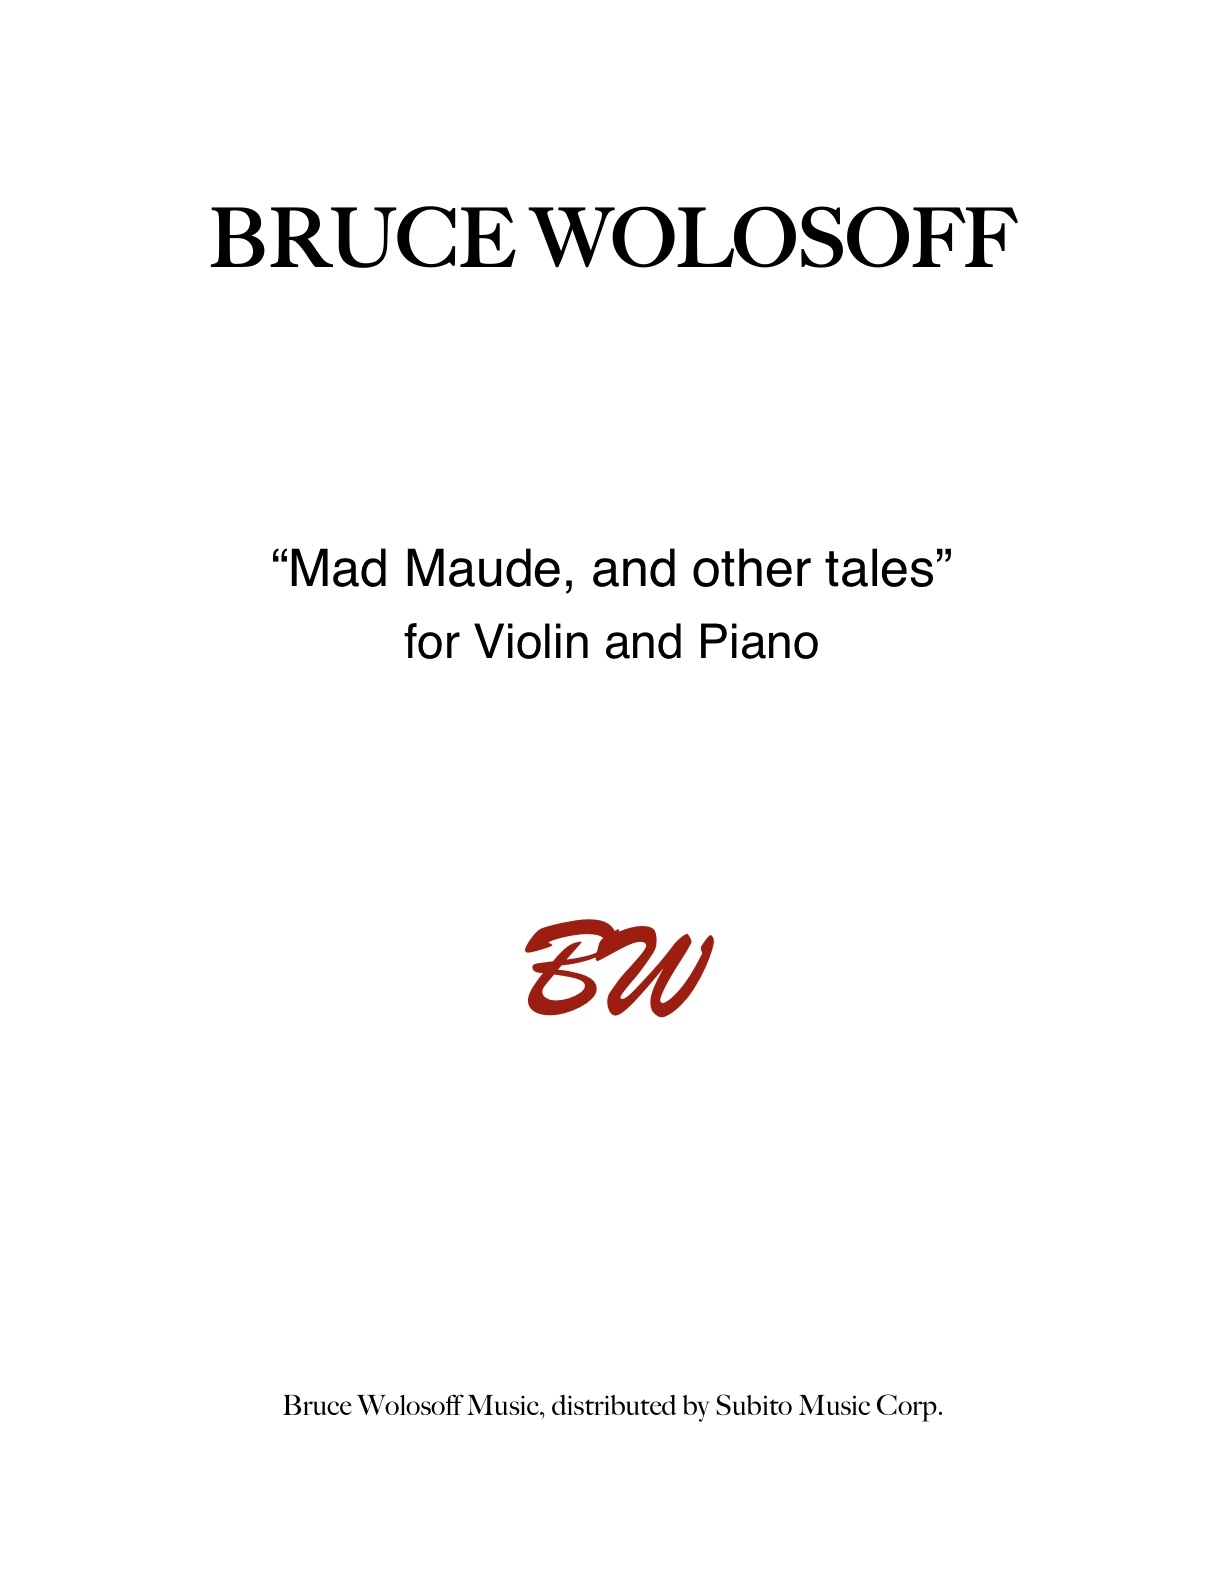 Mad Maude, and Other Tales for violin & piano